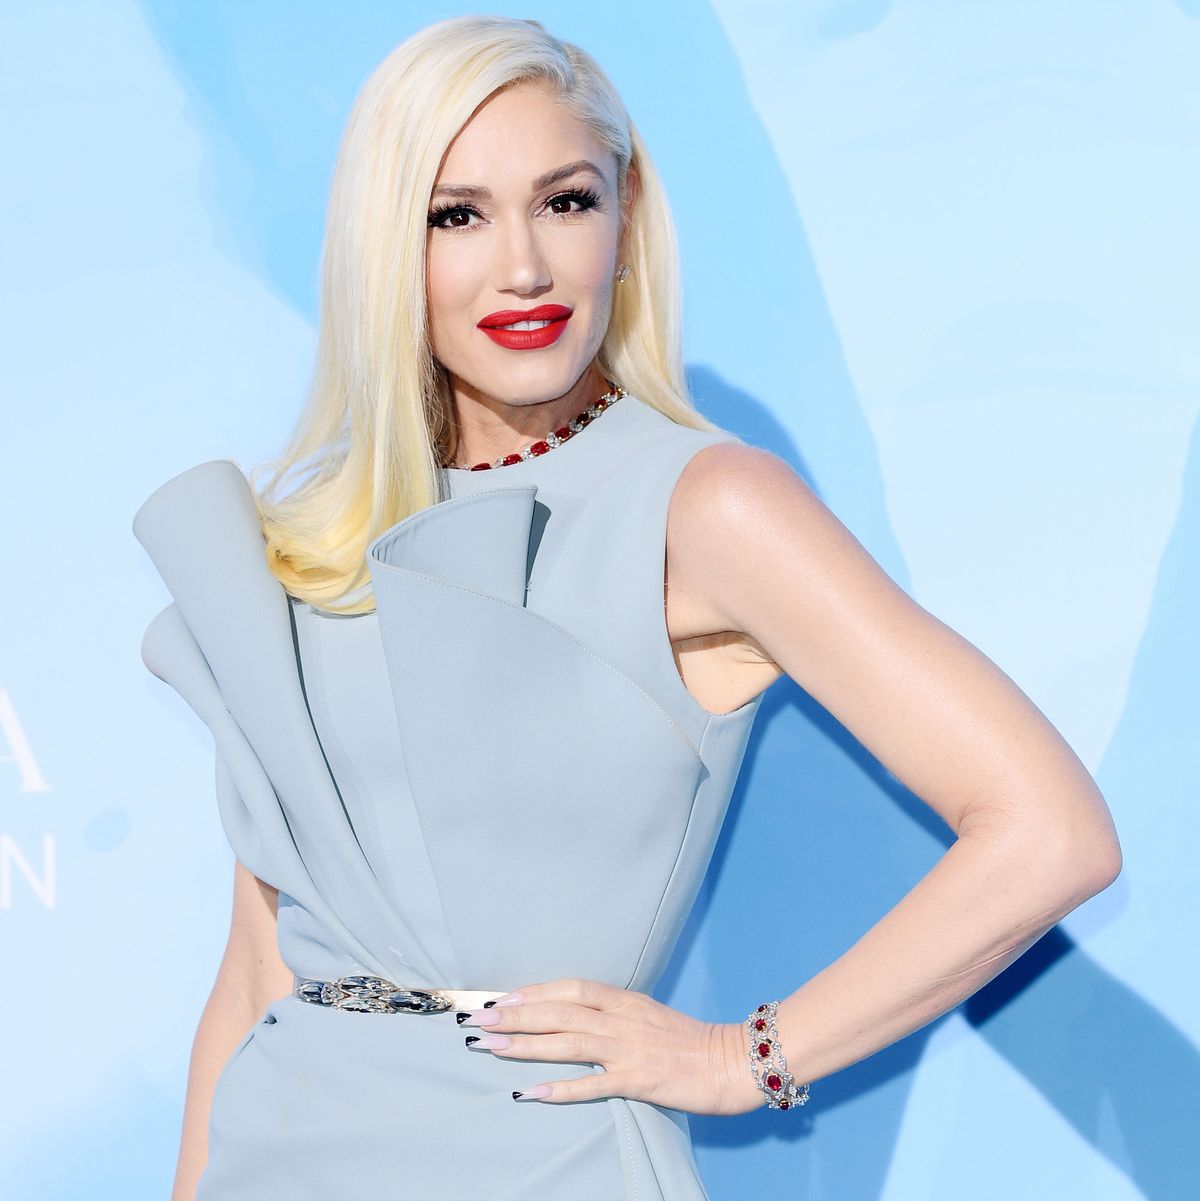 monte carlo, monaco   september 26  gwen stefani attends the gala for the global ocean hosted by hsh prince albert ii of monaco at opera of monte carlo on september 26, 2019 in monte carlo, monaco photo by daniele venturellidaniele venturelli getty images getty images for fondation prince albert ii